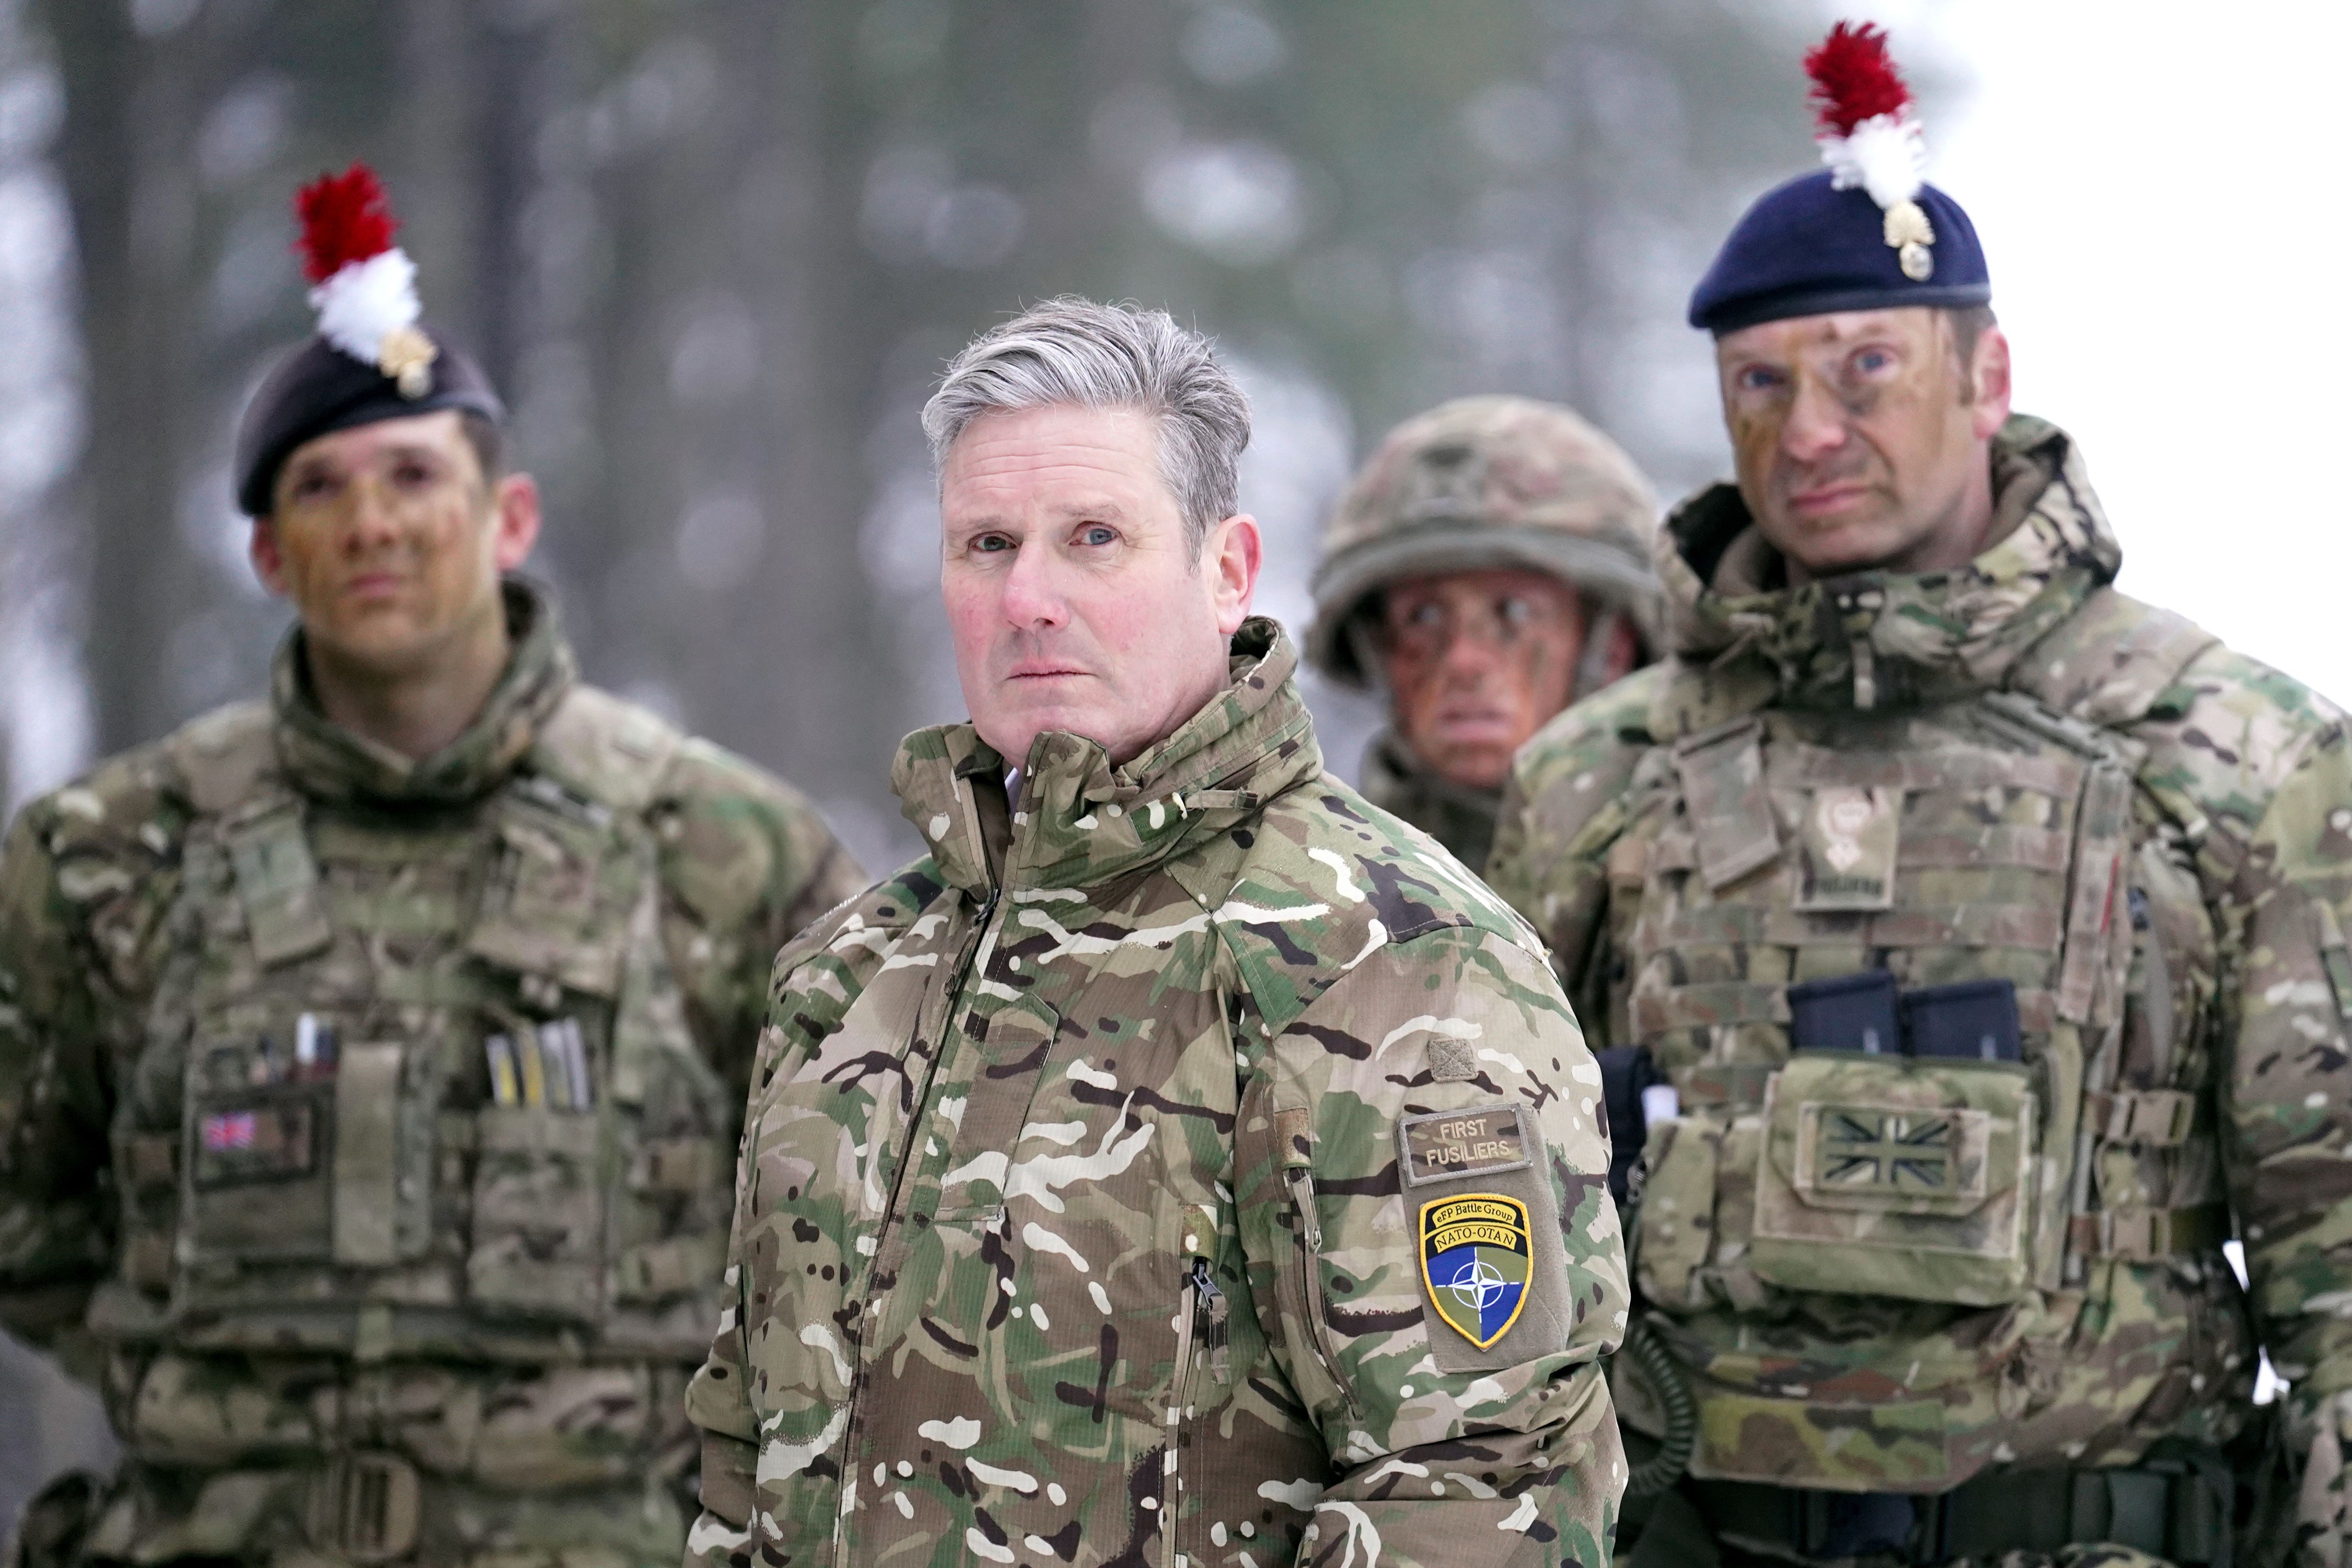 Labour leader Keir Starmer during his visit to meet British troops at the Nato base in Estonia